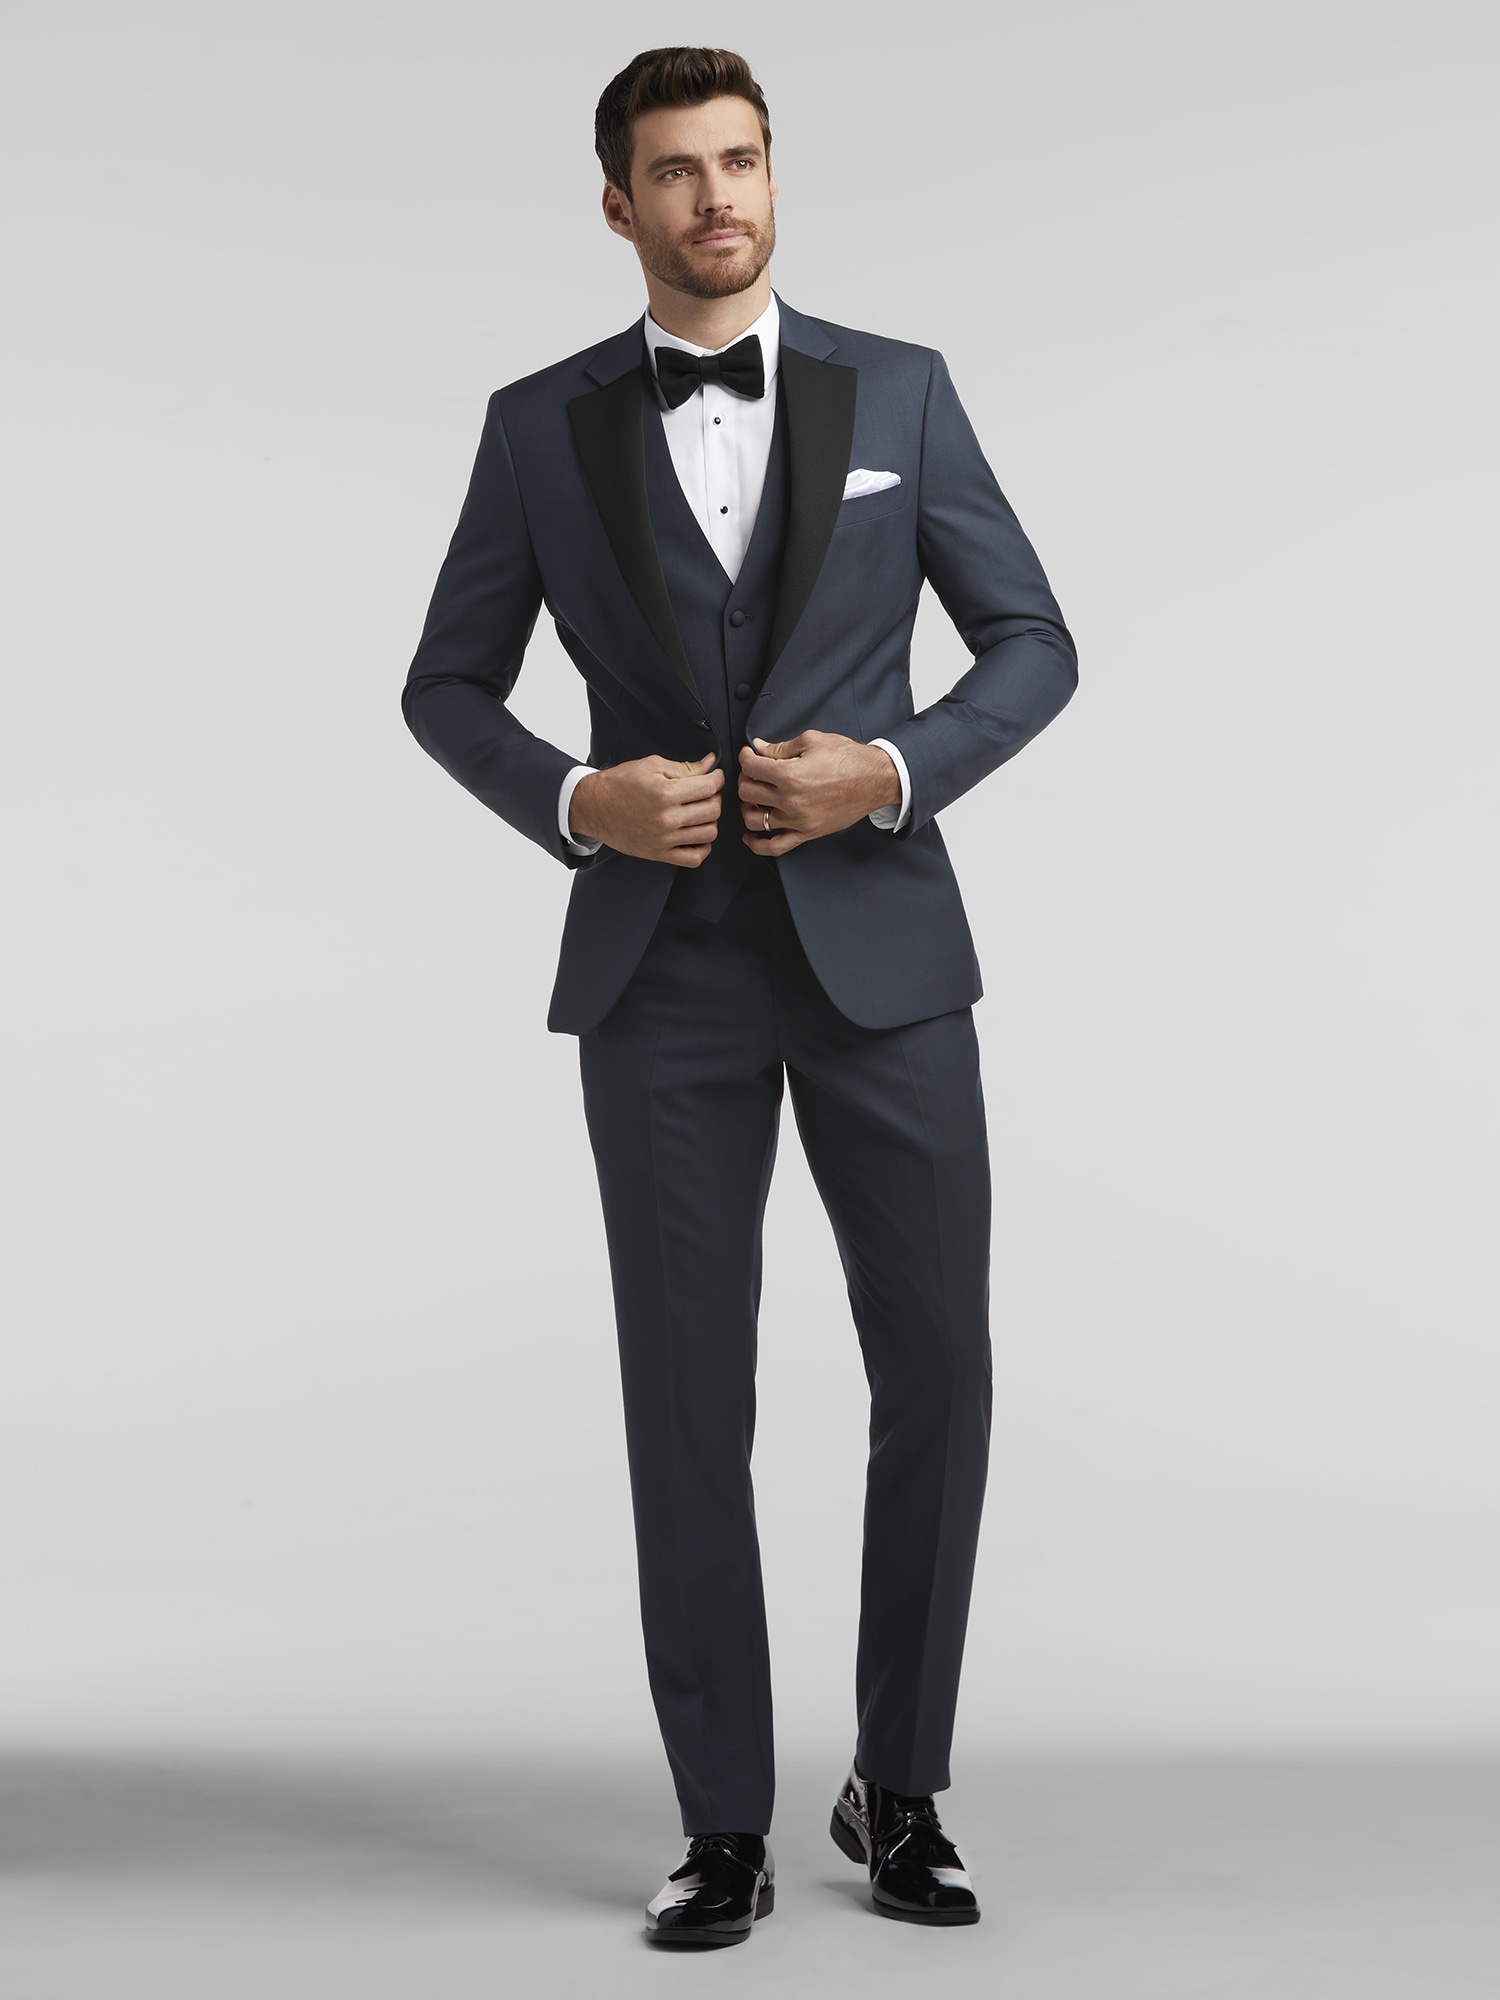 Wedding & Special Event Tuxedos for Sale Online